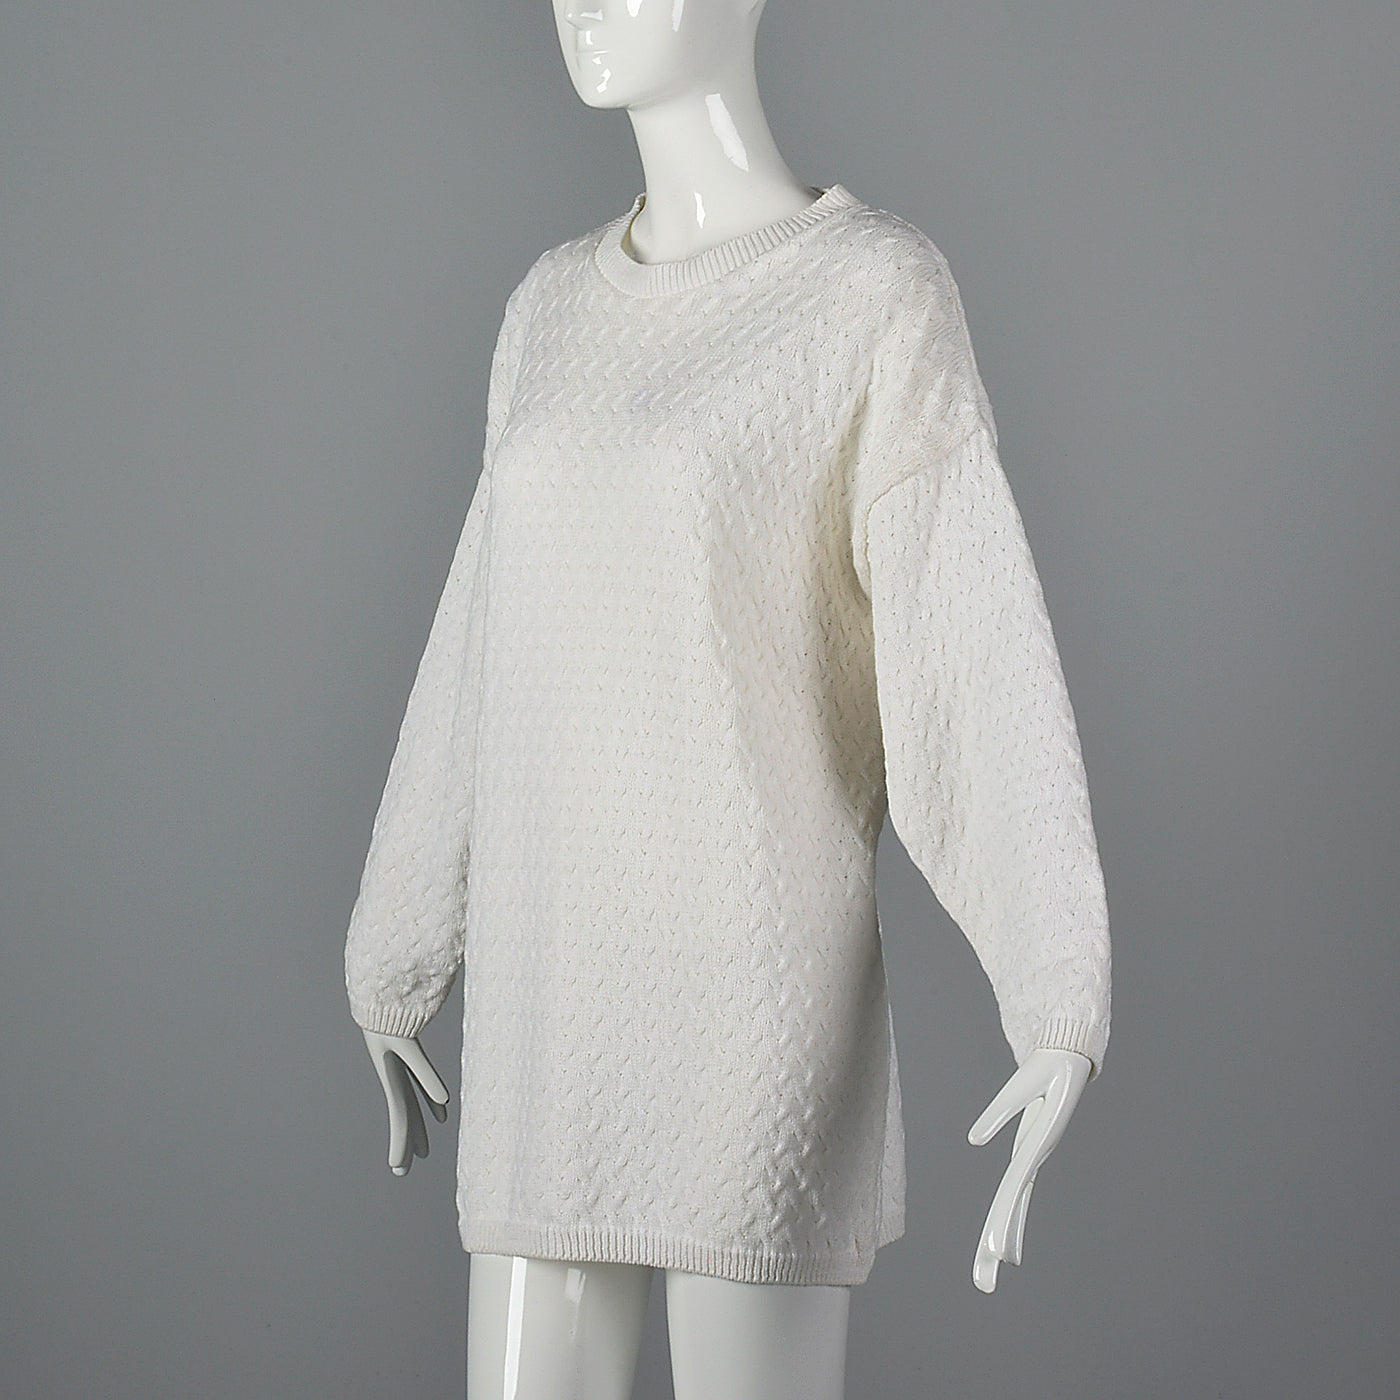 1980s Deadstock White Cable Knit Sweater